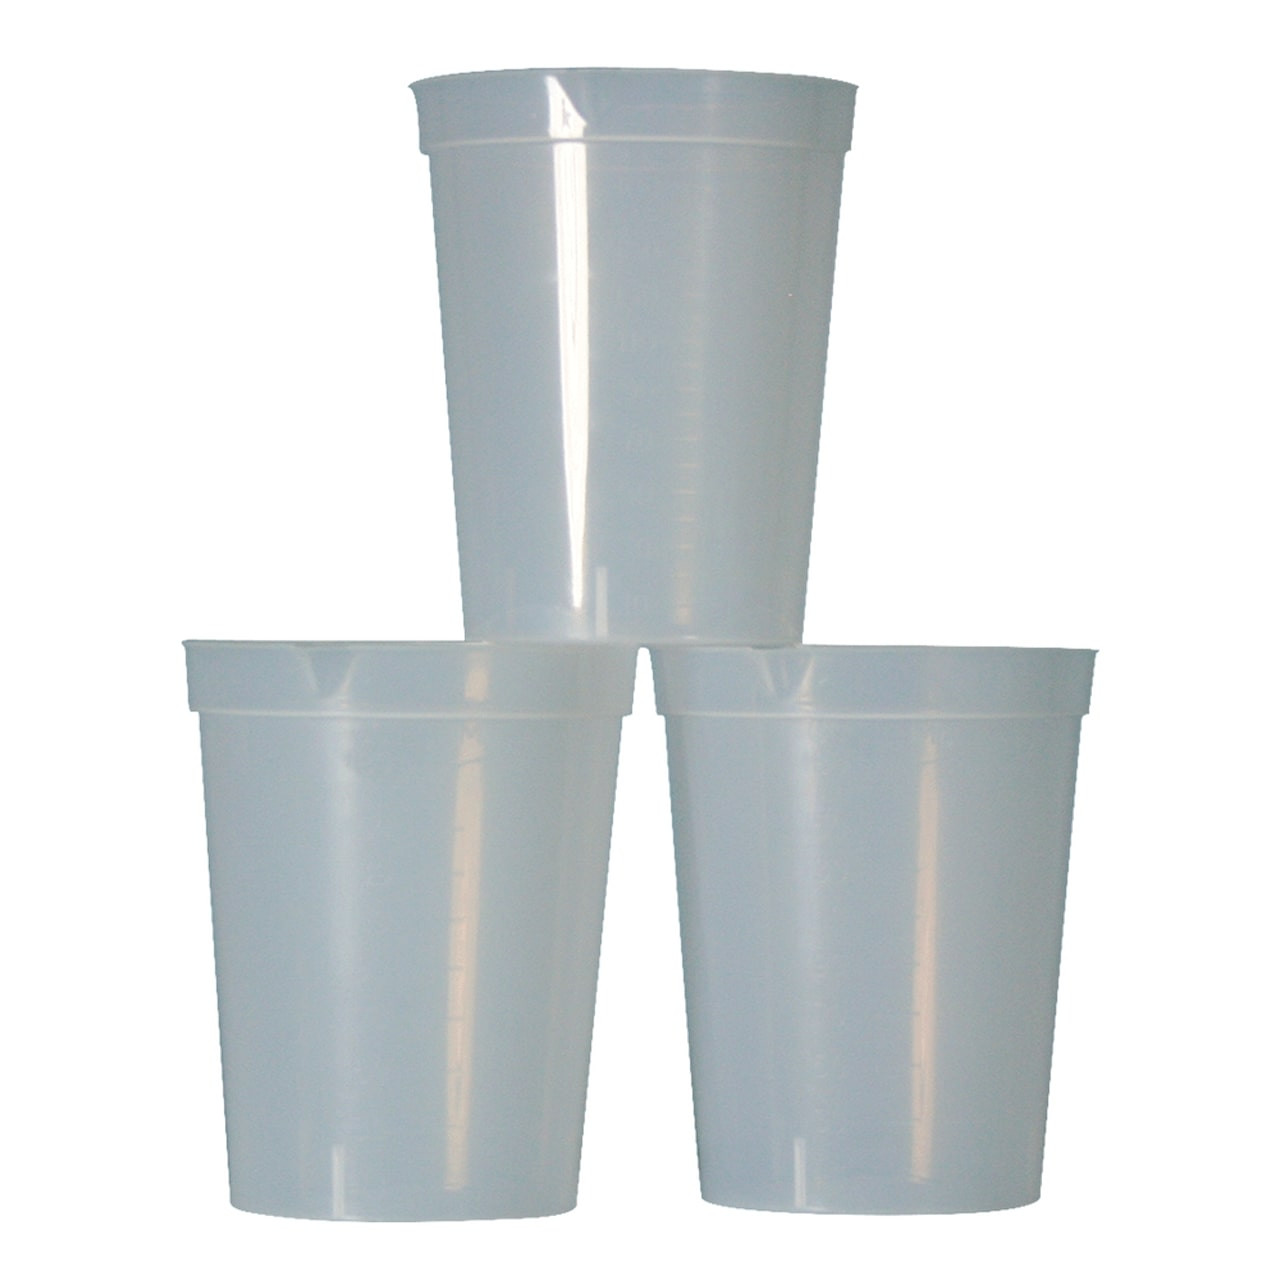 Cups to Ounces - How Many Ounces in a Cup?